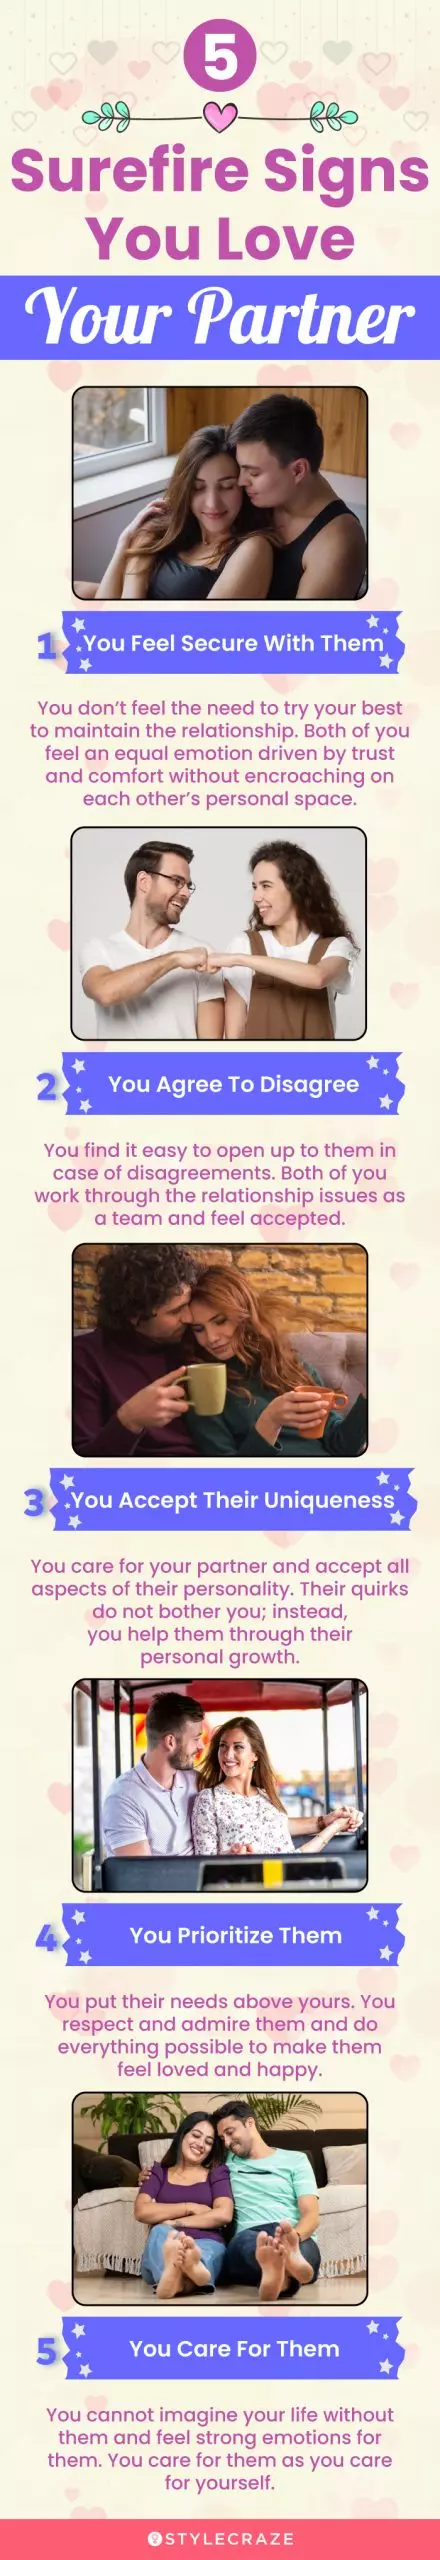 5 surefire signs you love your partner (infographic)